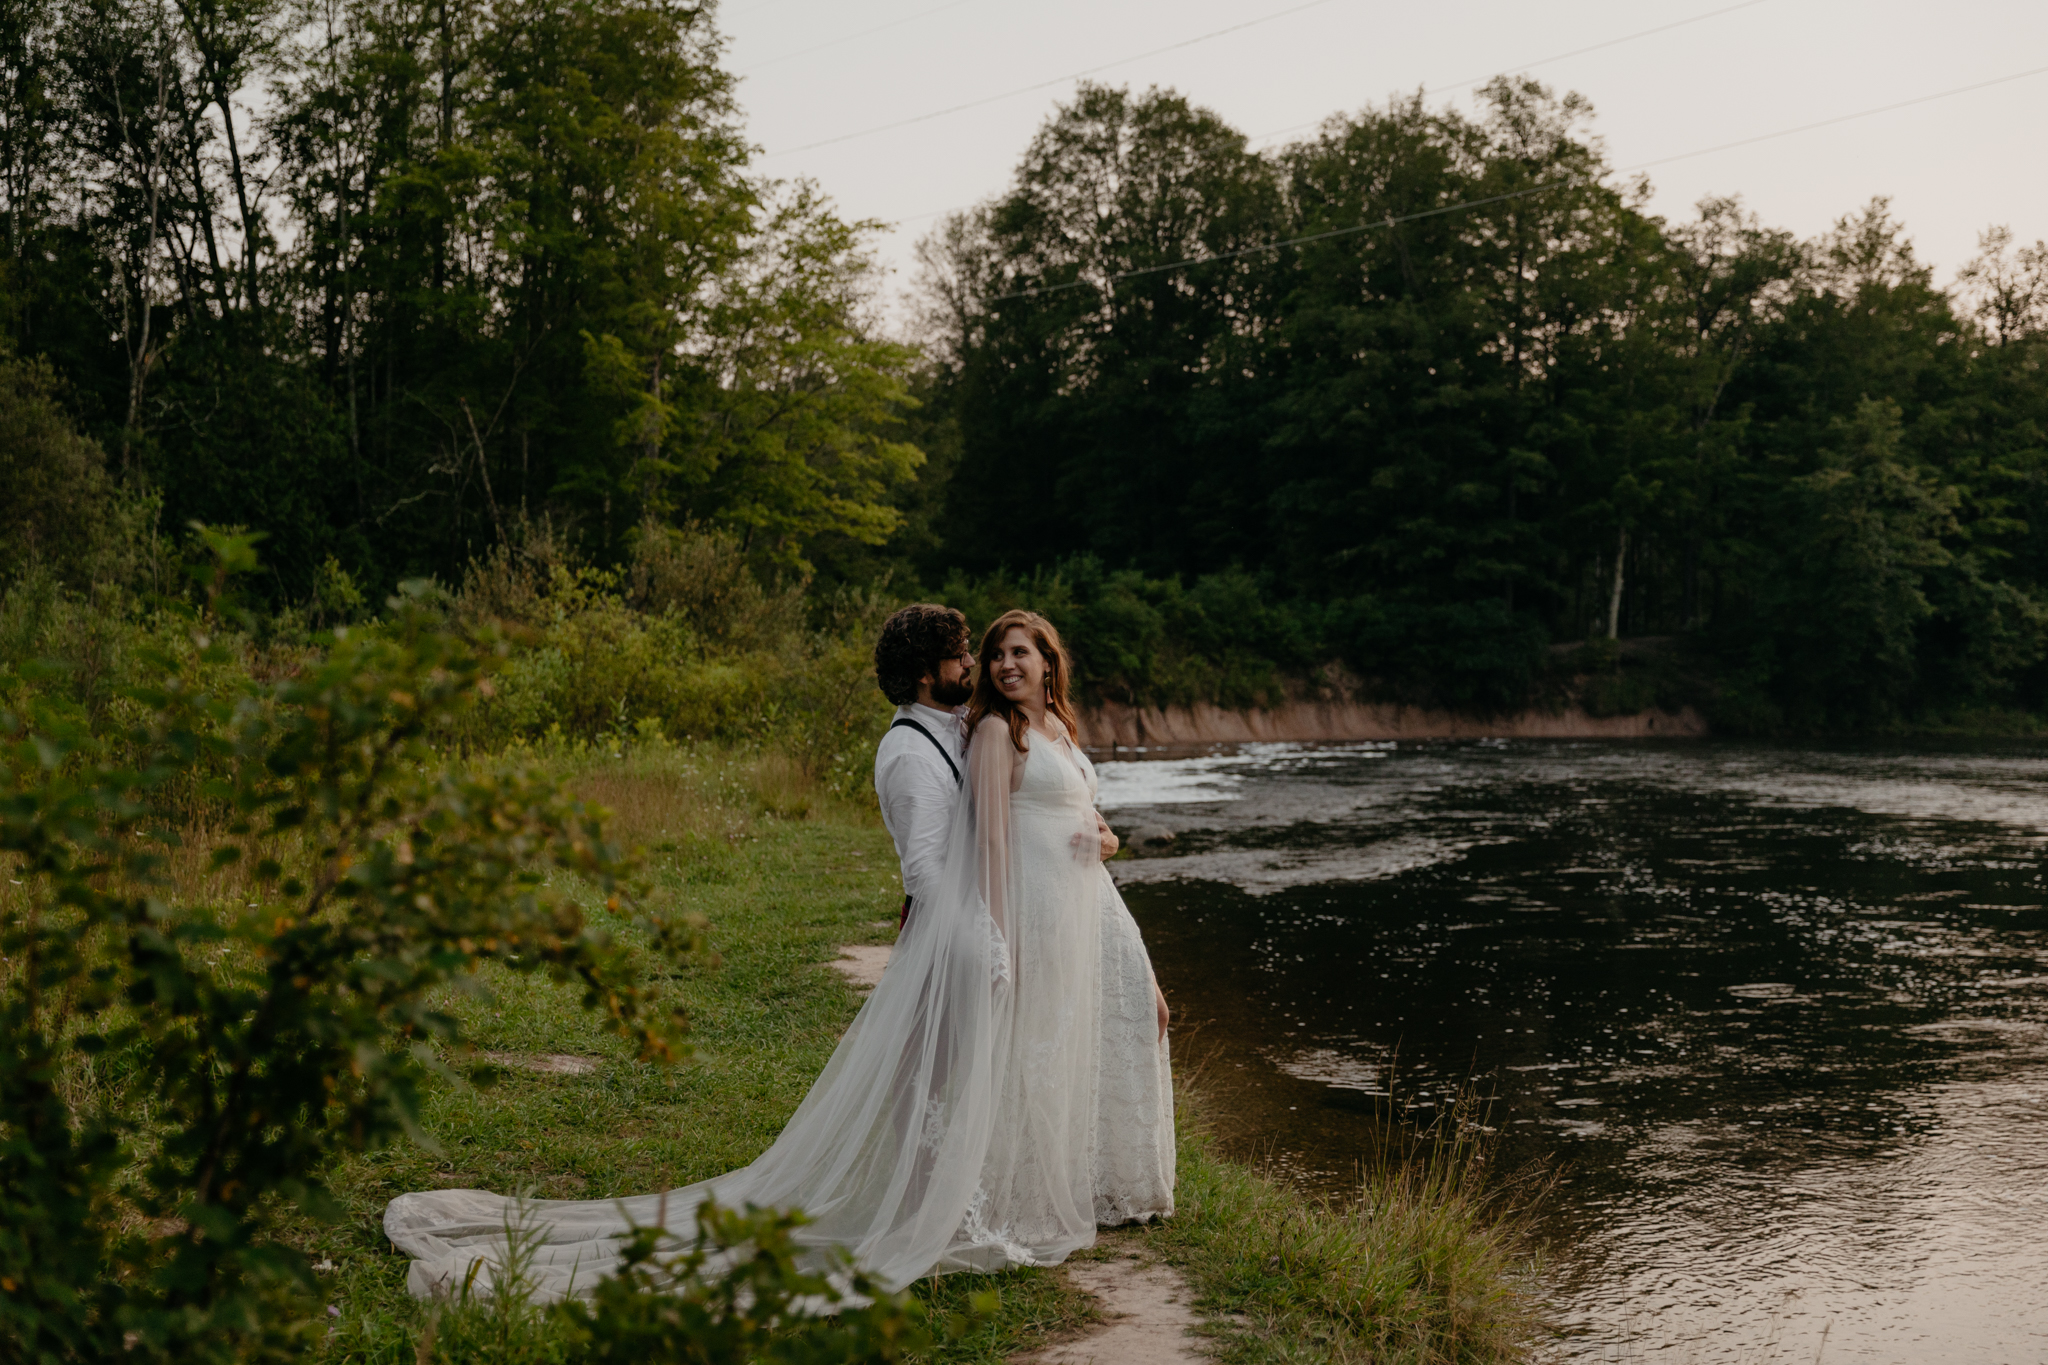 Intimate moments from this Michigan Elopement in Manistee National Forest